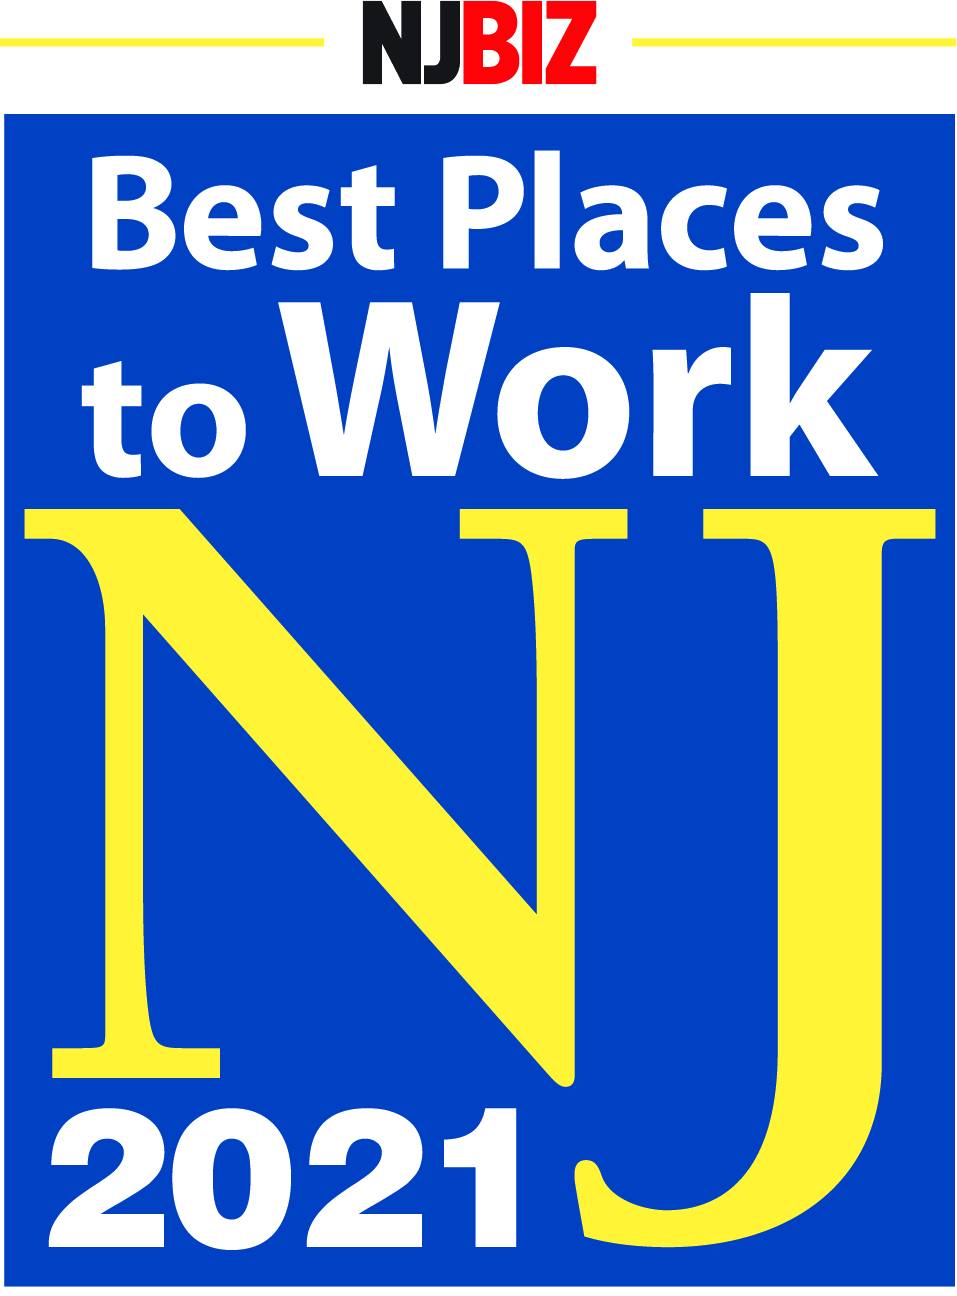 Laddey, Clark & Ryan Named One of the Best Places to Work In New Jersey for Second Year in a Row